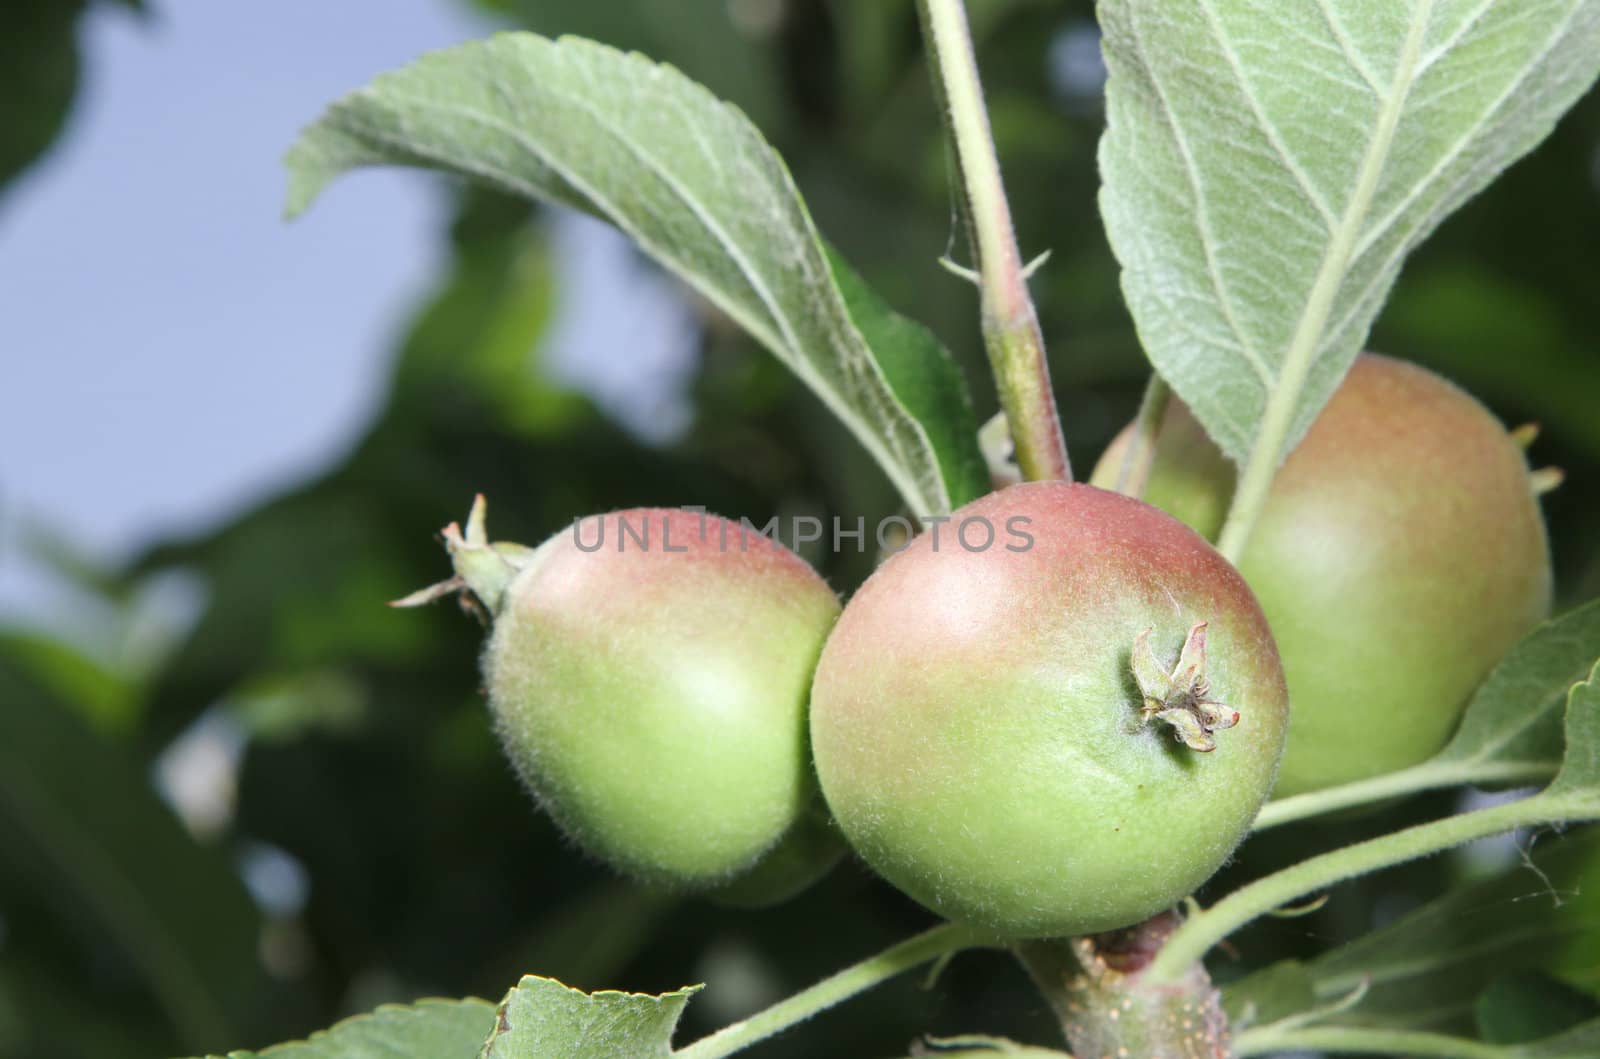 Three young immature apples growing on a branch.